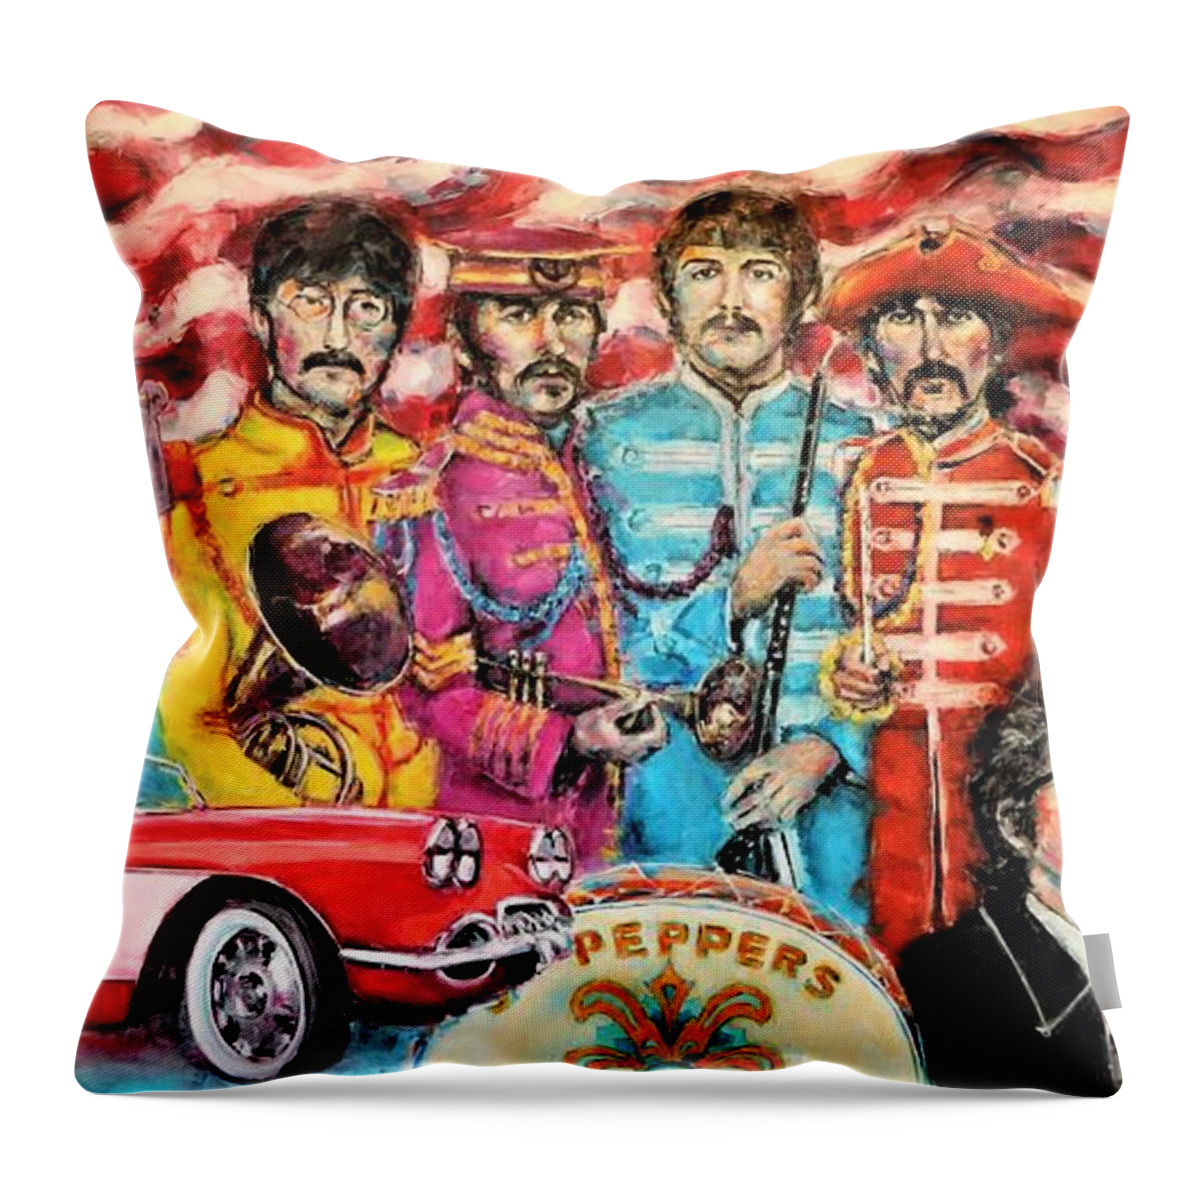 Music Throw Pillow featuring the painting American Pie by Dan Campbell